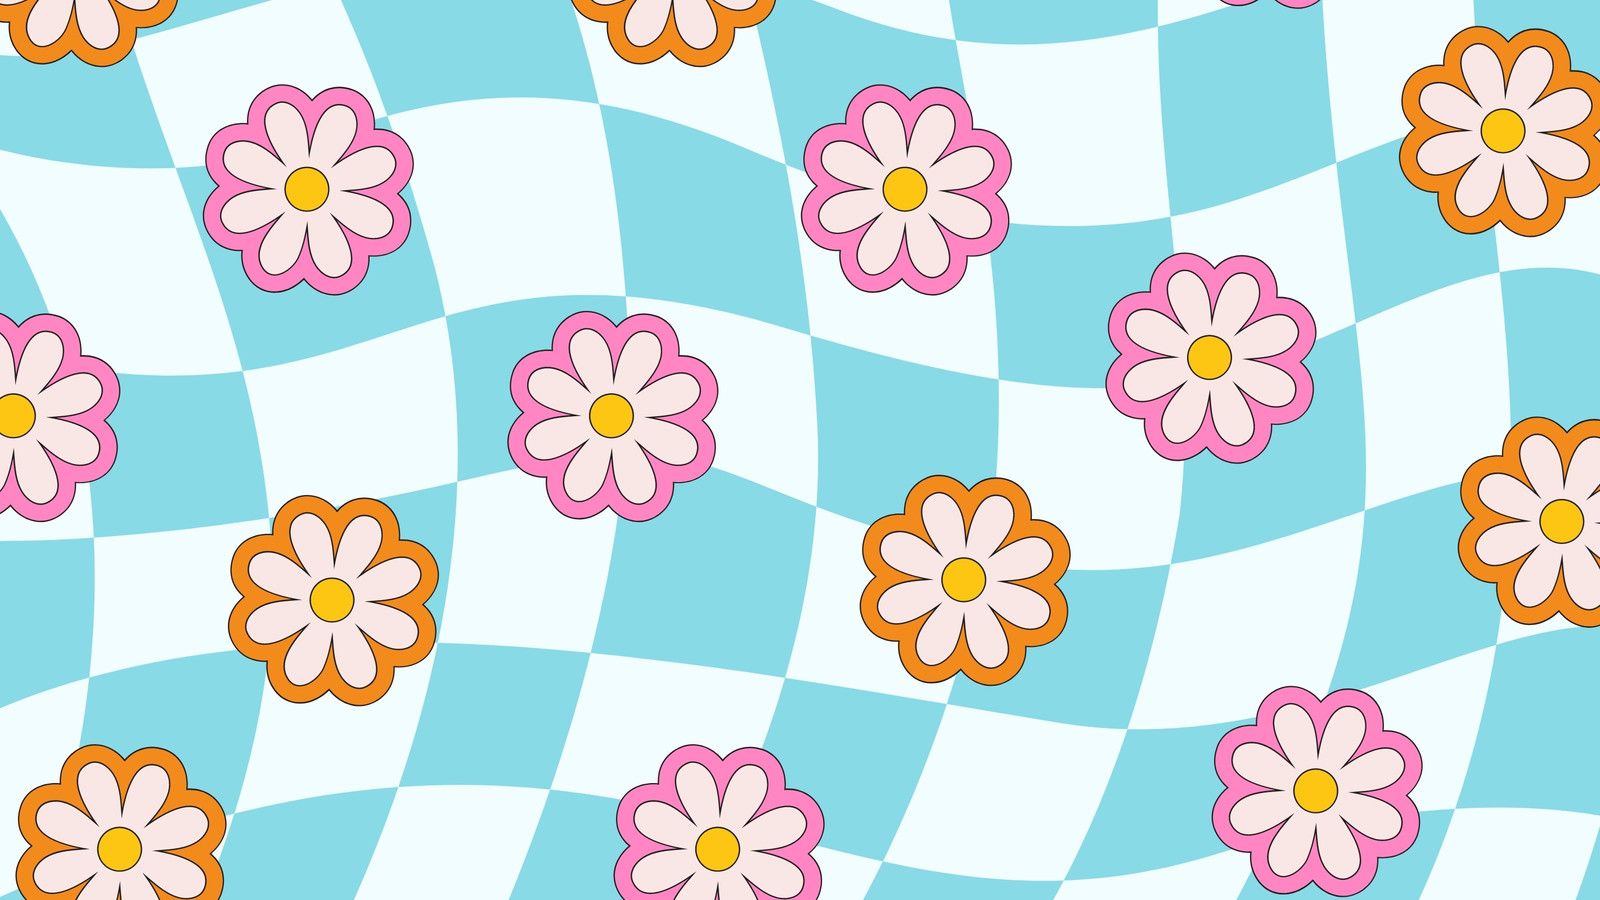 A pattern of flowers on blue and white checkered background - Retro